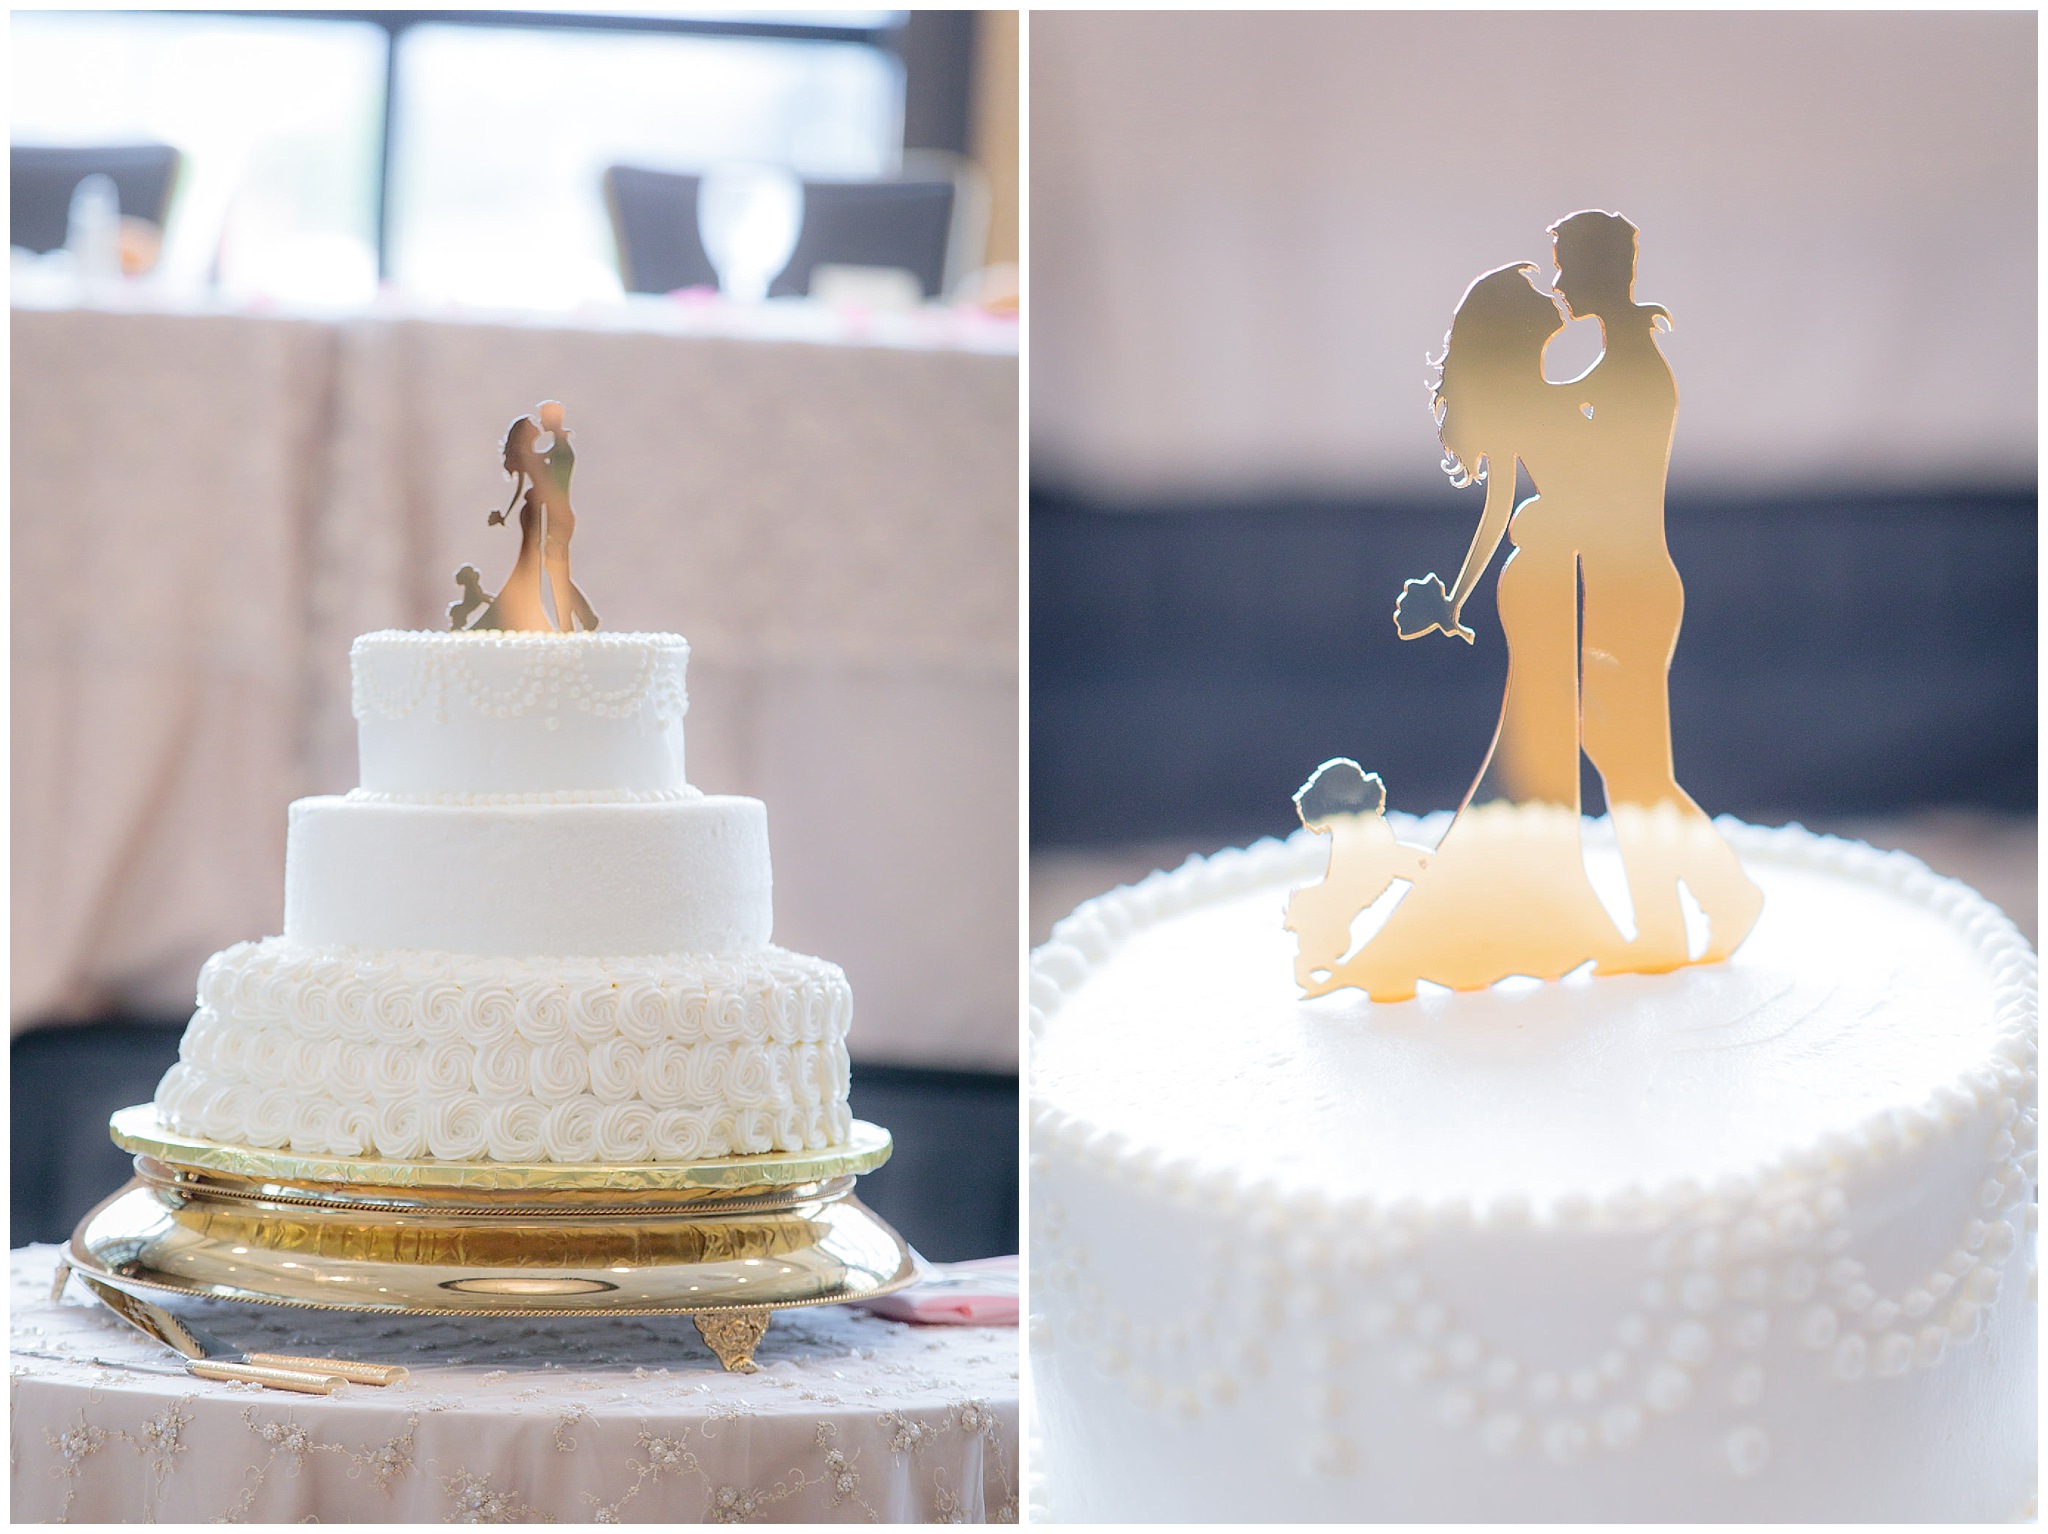 Wedding cake with gold cake topper at a Duquesne University reception